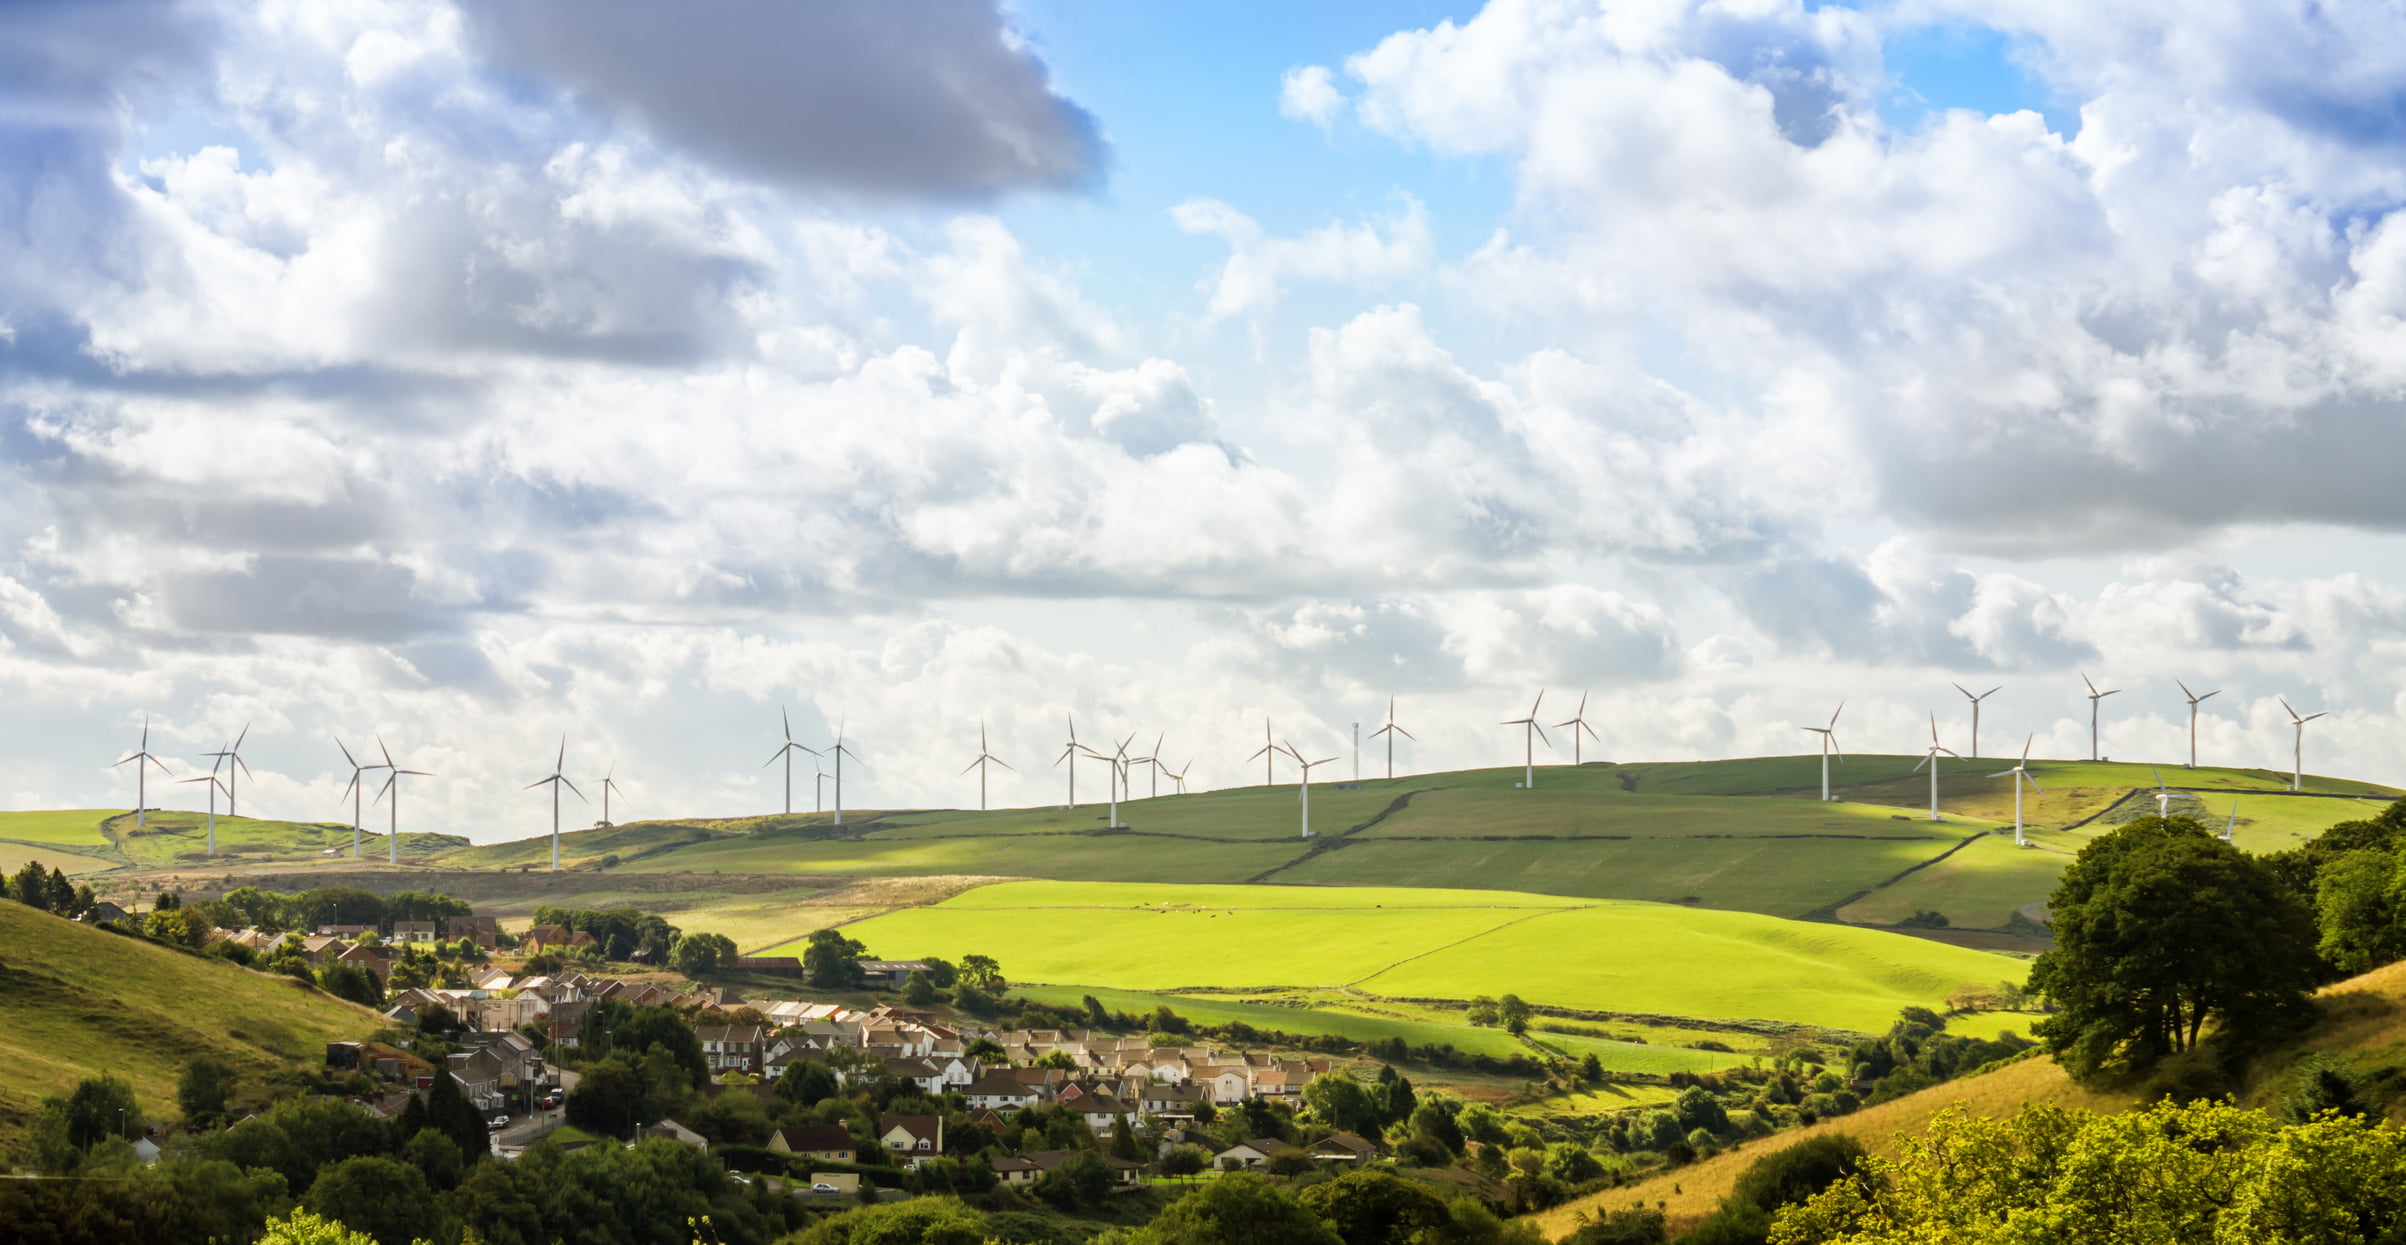 Long range view of wind turbines in the countryside